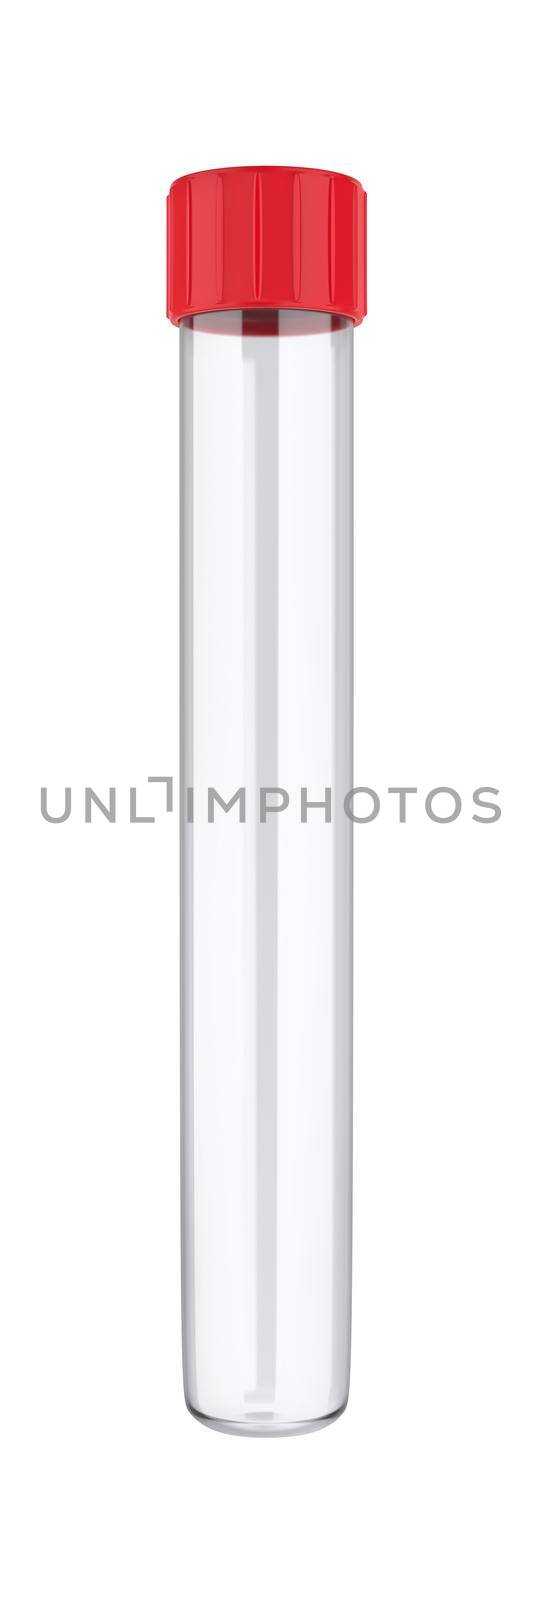 Empty test tube by magraphics